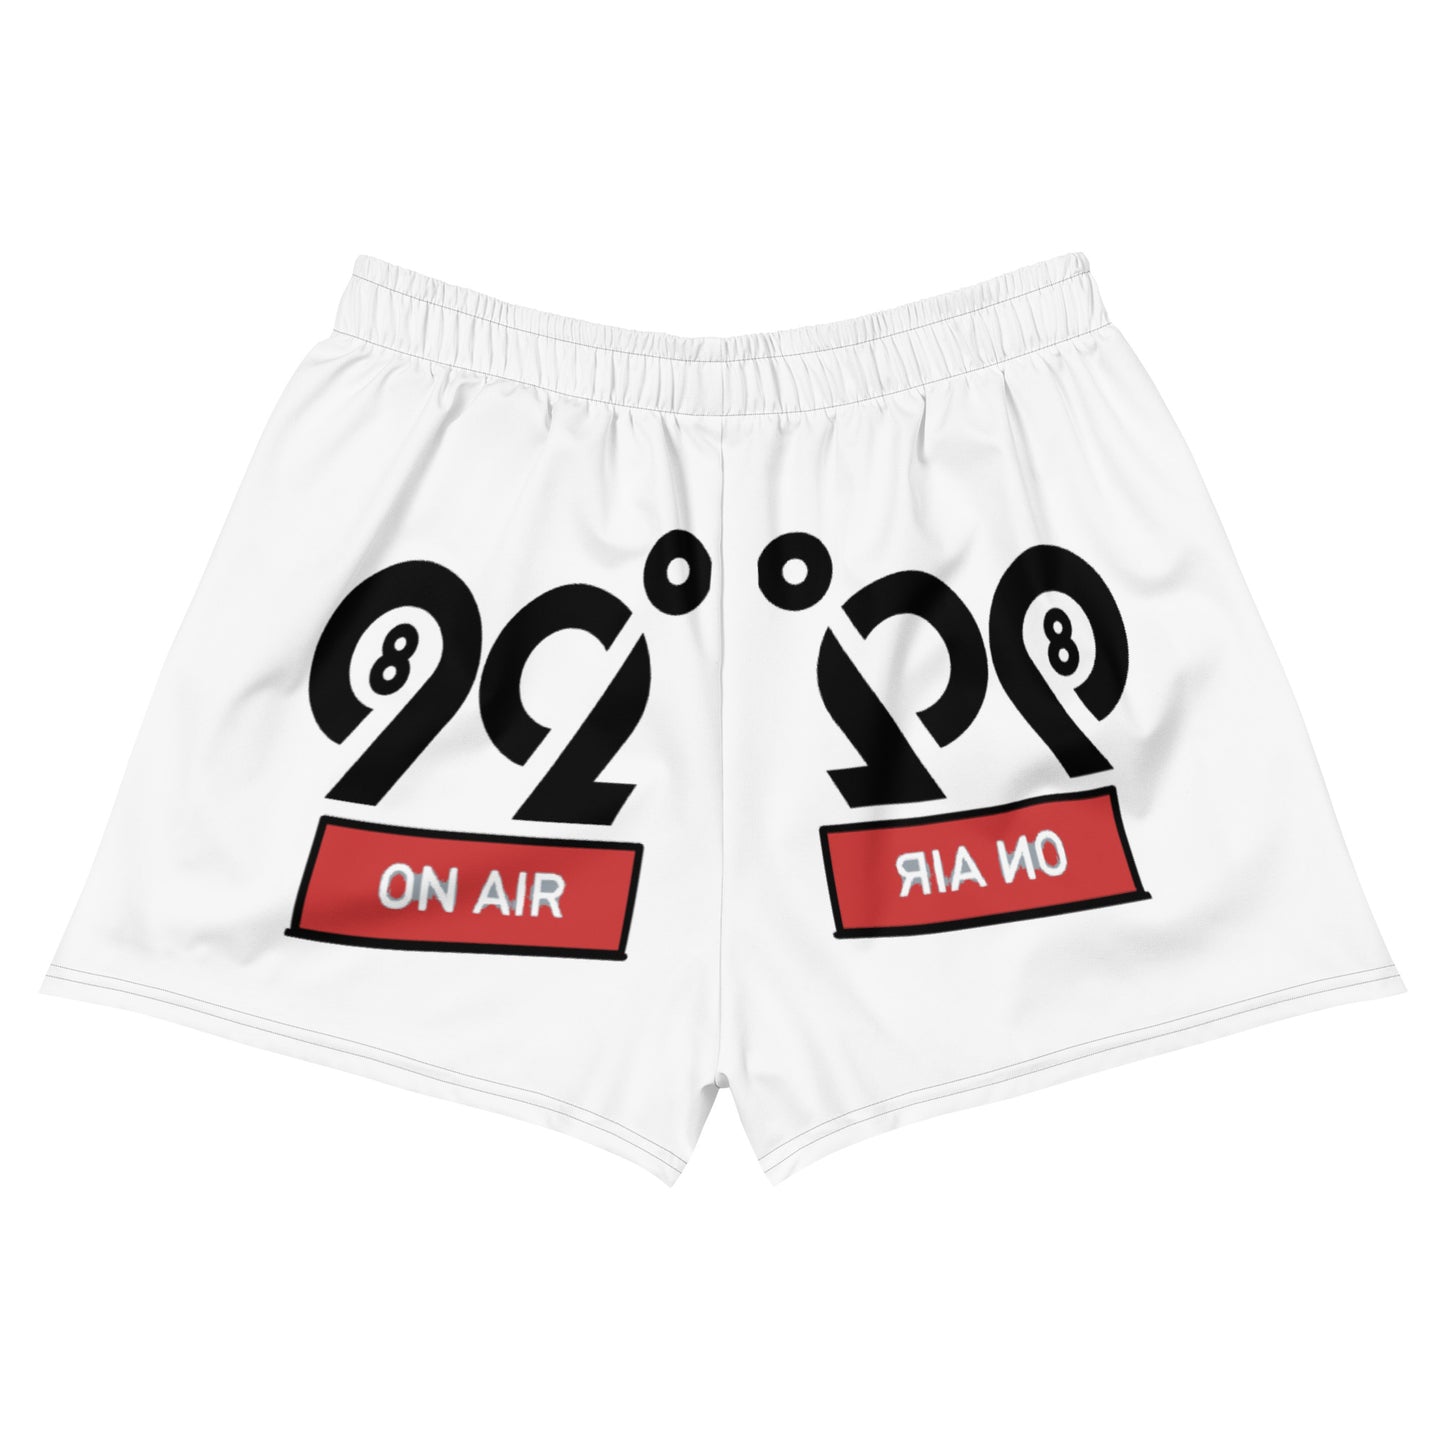 8 More Than 92 Degrees- Women’s  Athletic Shorts